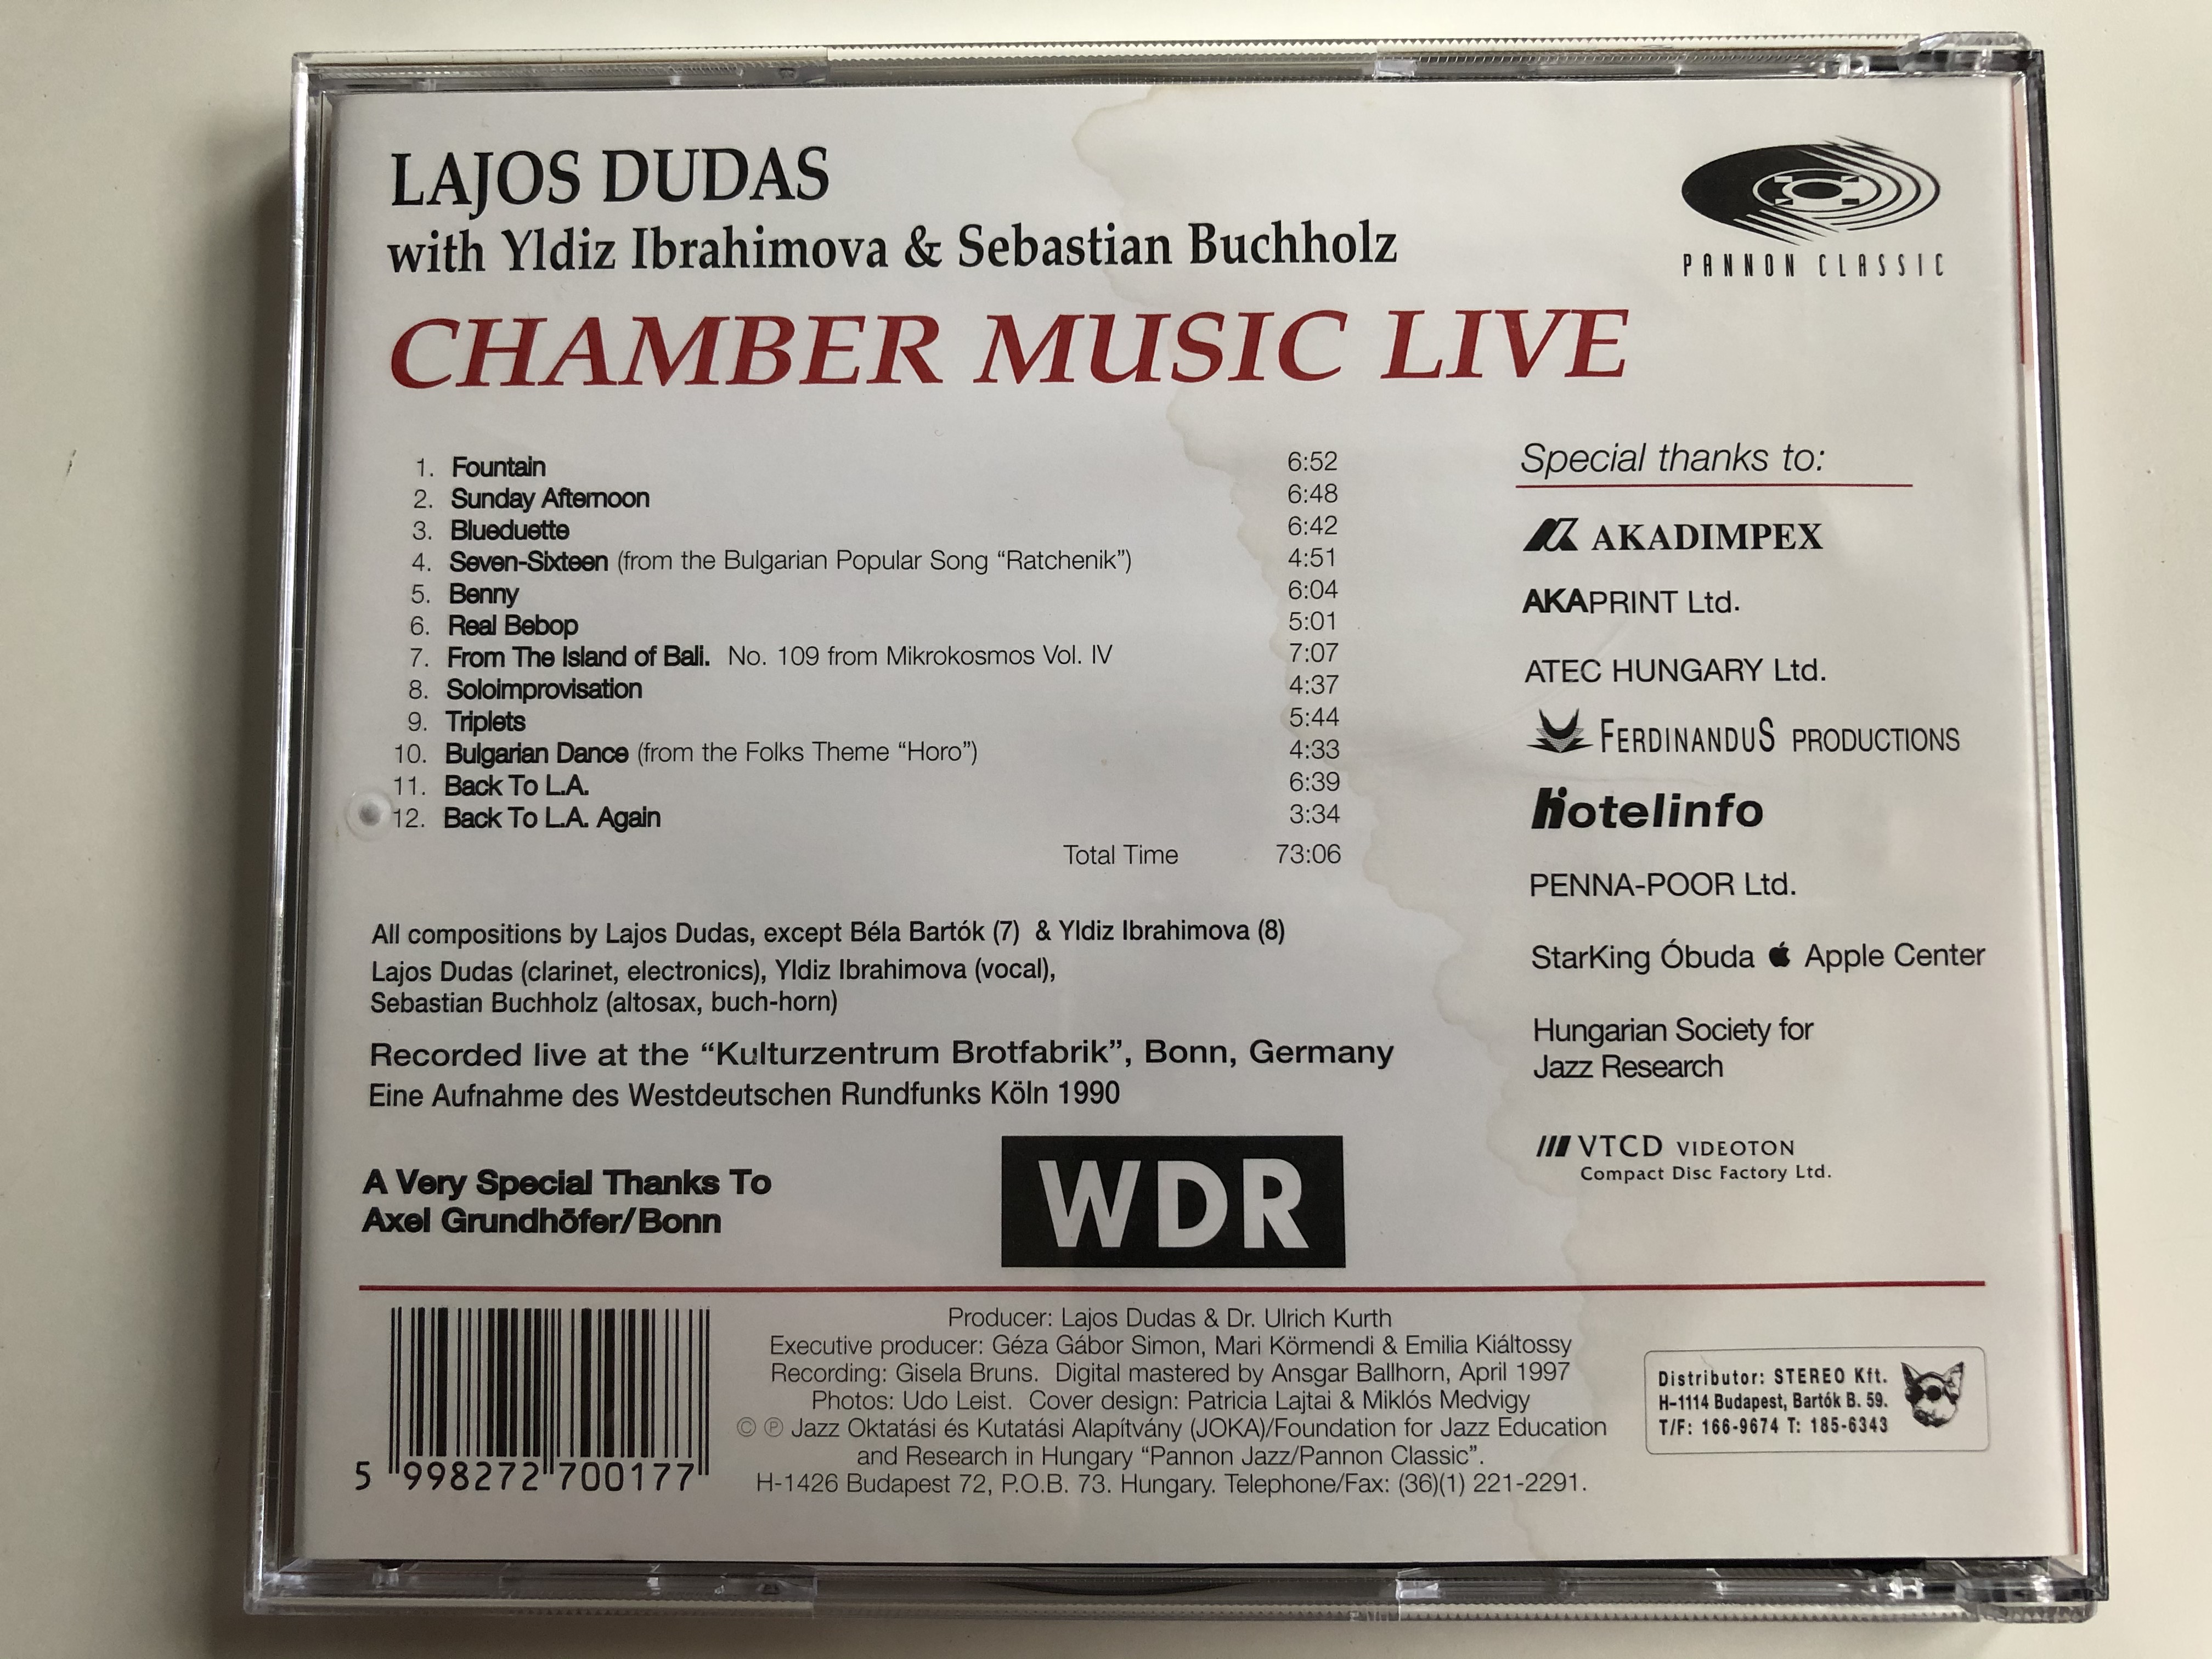 lajos-dudas-chamber-music-live-foundation-for-jazz-education-and-research-in-hungary-presents-world-premier-recording-pannon-classic-audio-cd-1997-pcl-8004-6-.jpg